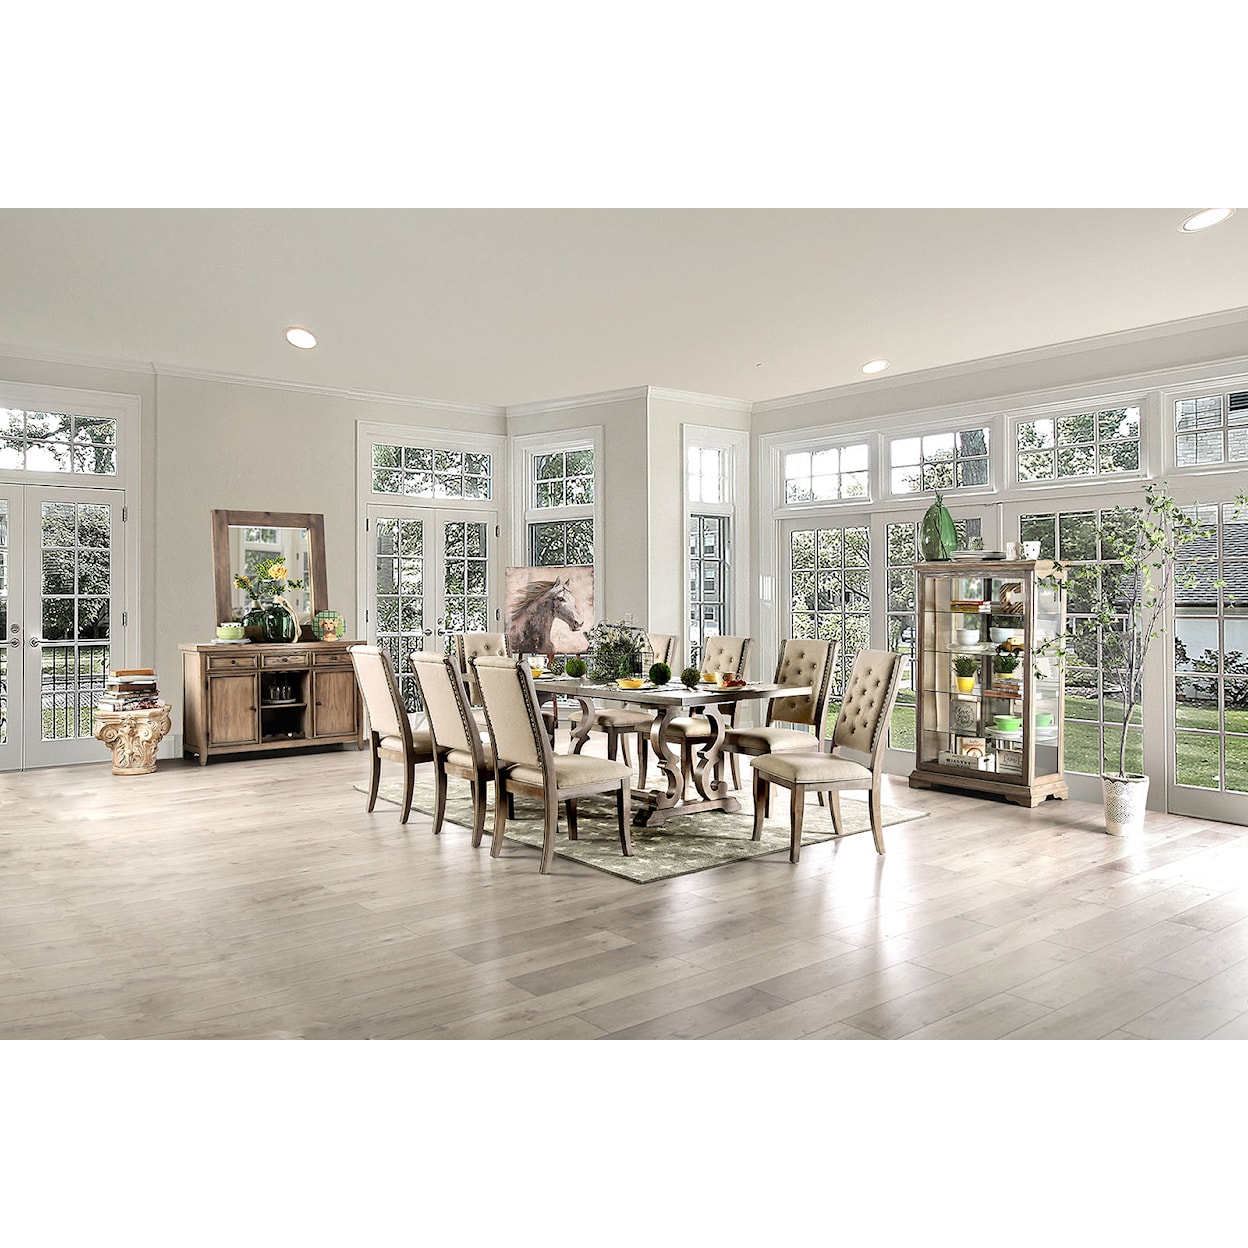 Furniture of America Patience 7 Pc. Dining Table Set